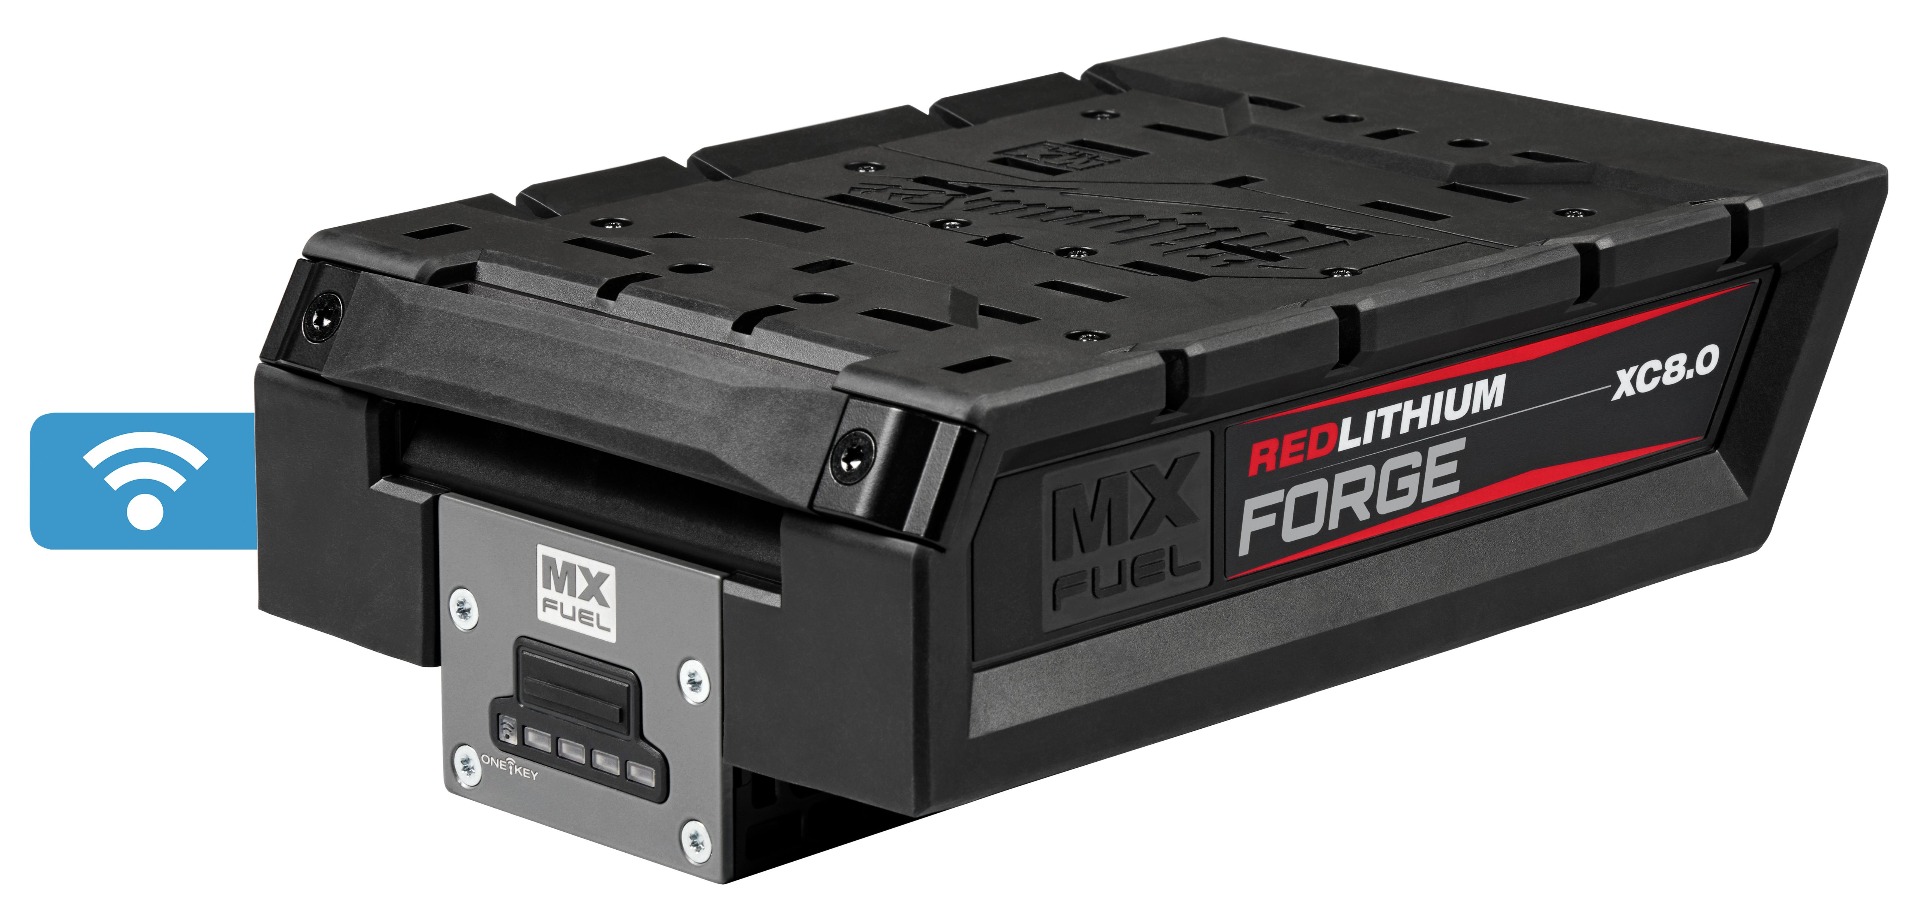 MX FUEL™ REDLITHIUM™  FORGE™  XC8.0 BATTERY PACK